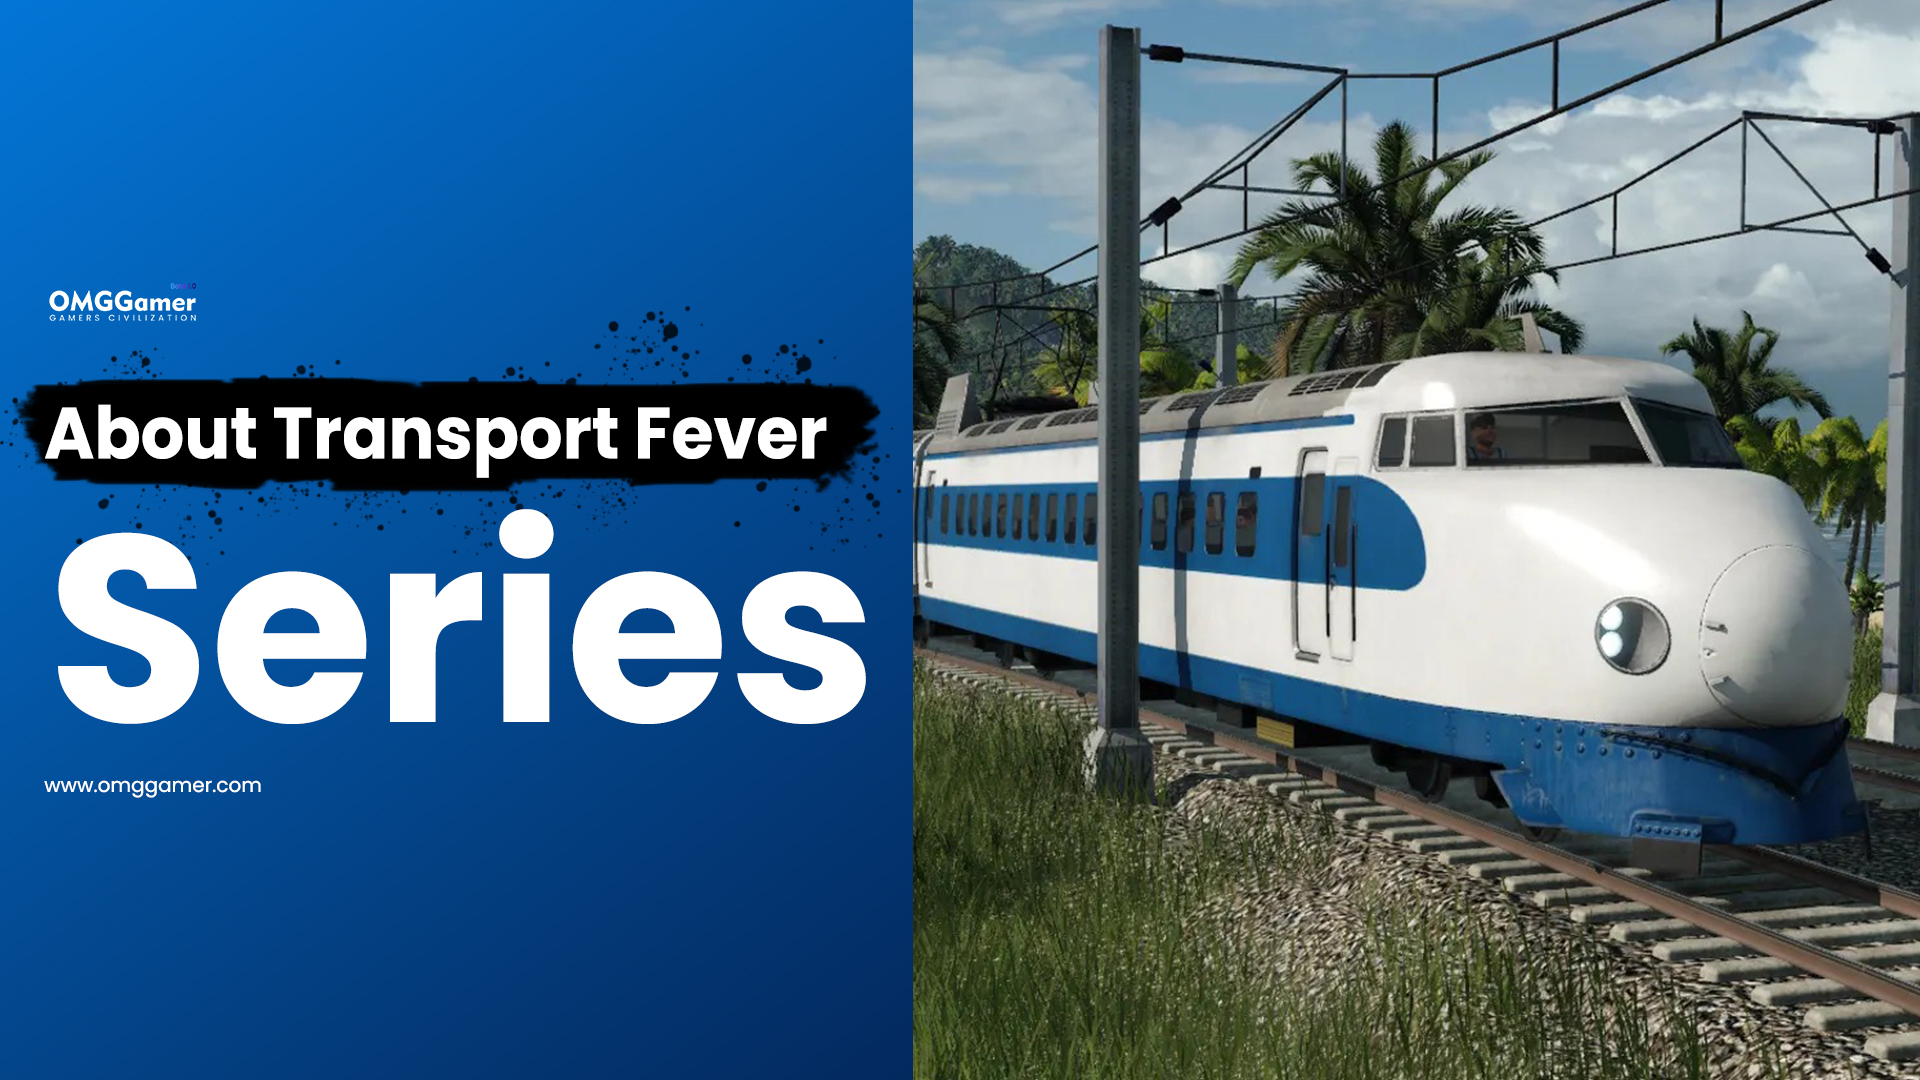 About Transport Fever Series